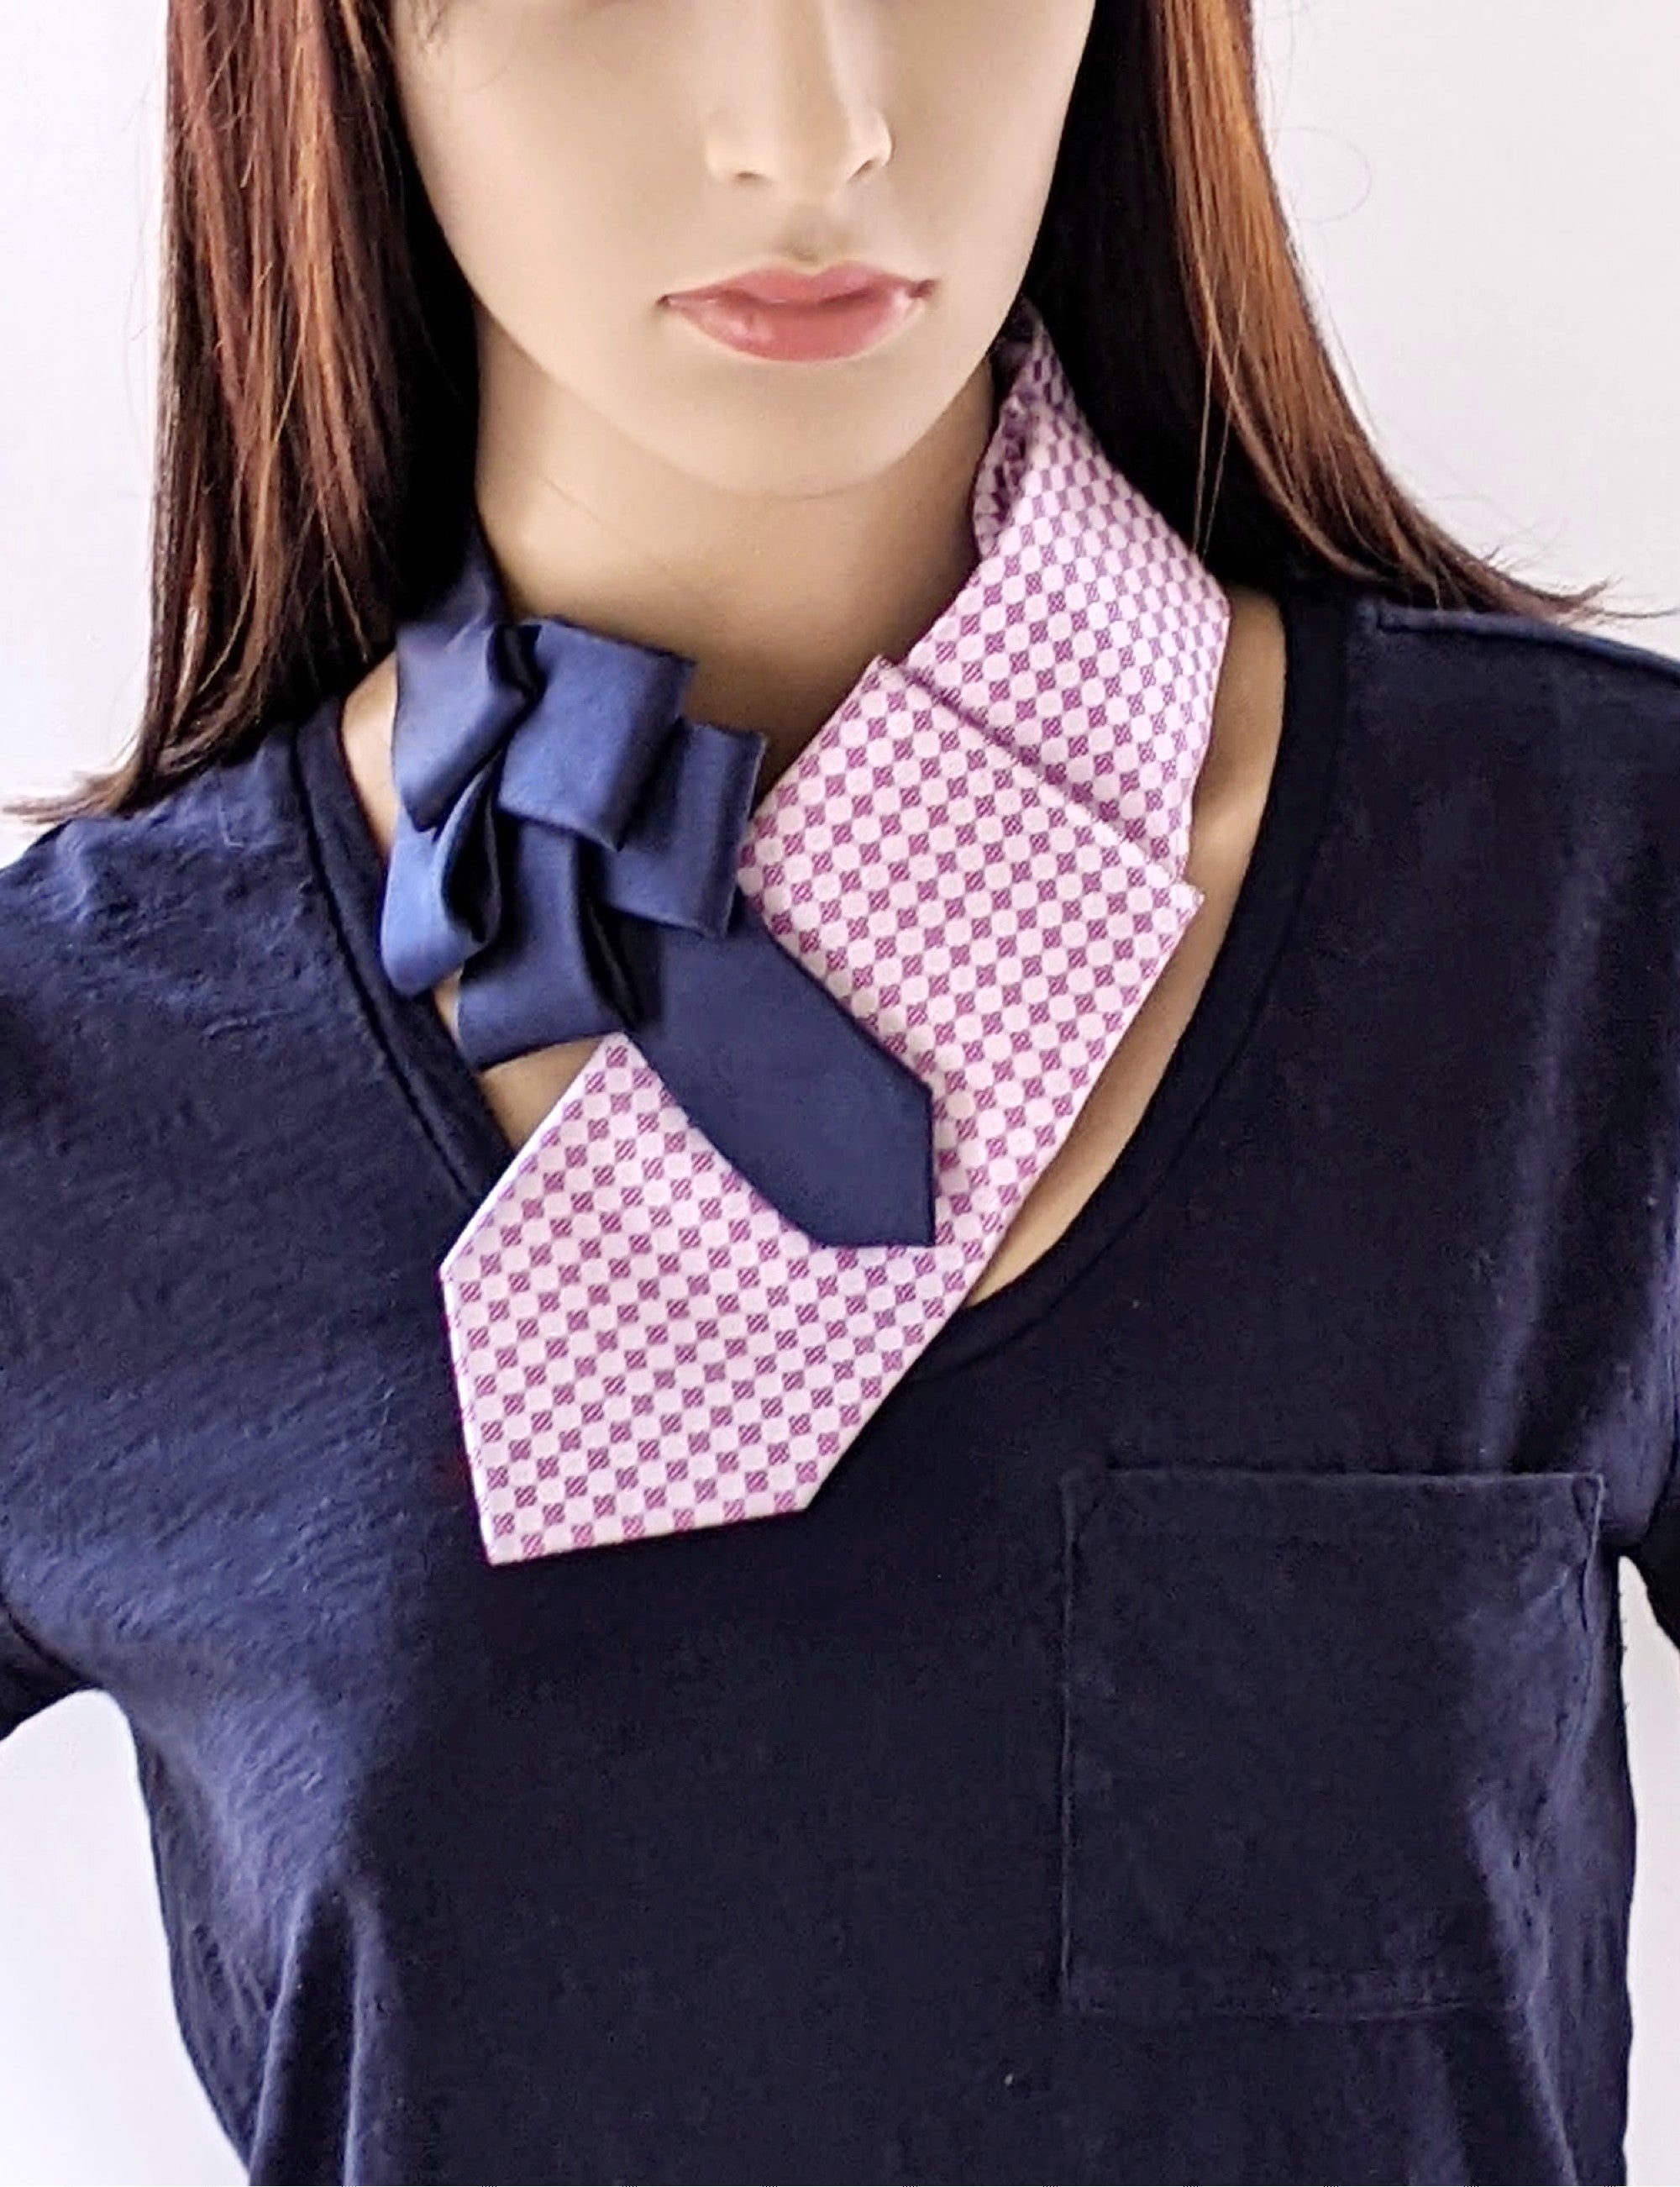 Lilac and Navy Ascot Scarf